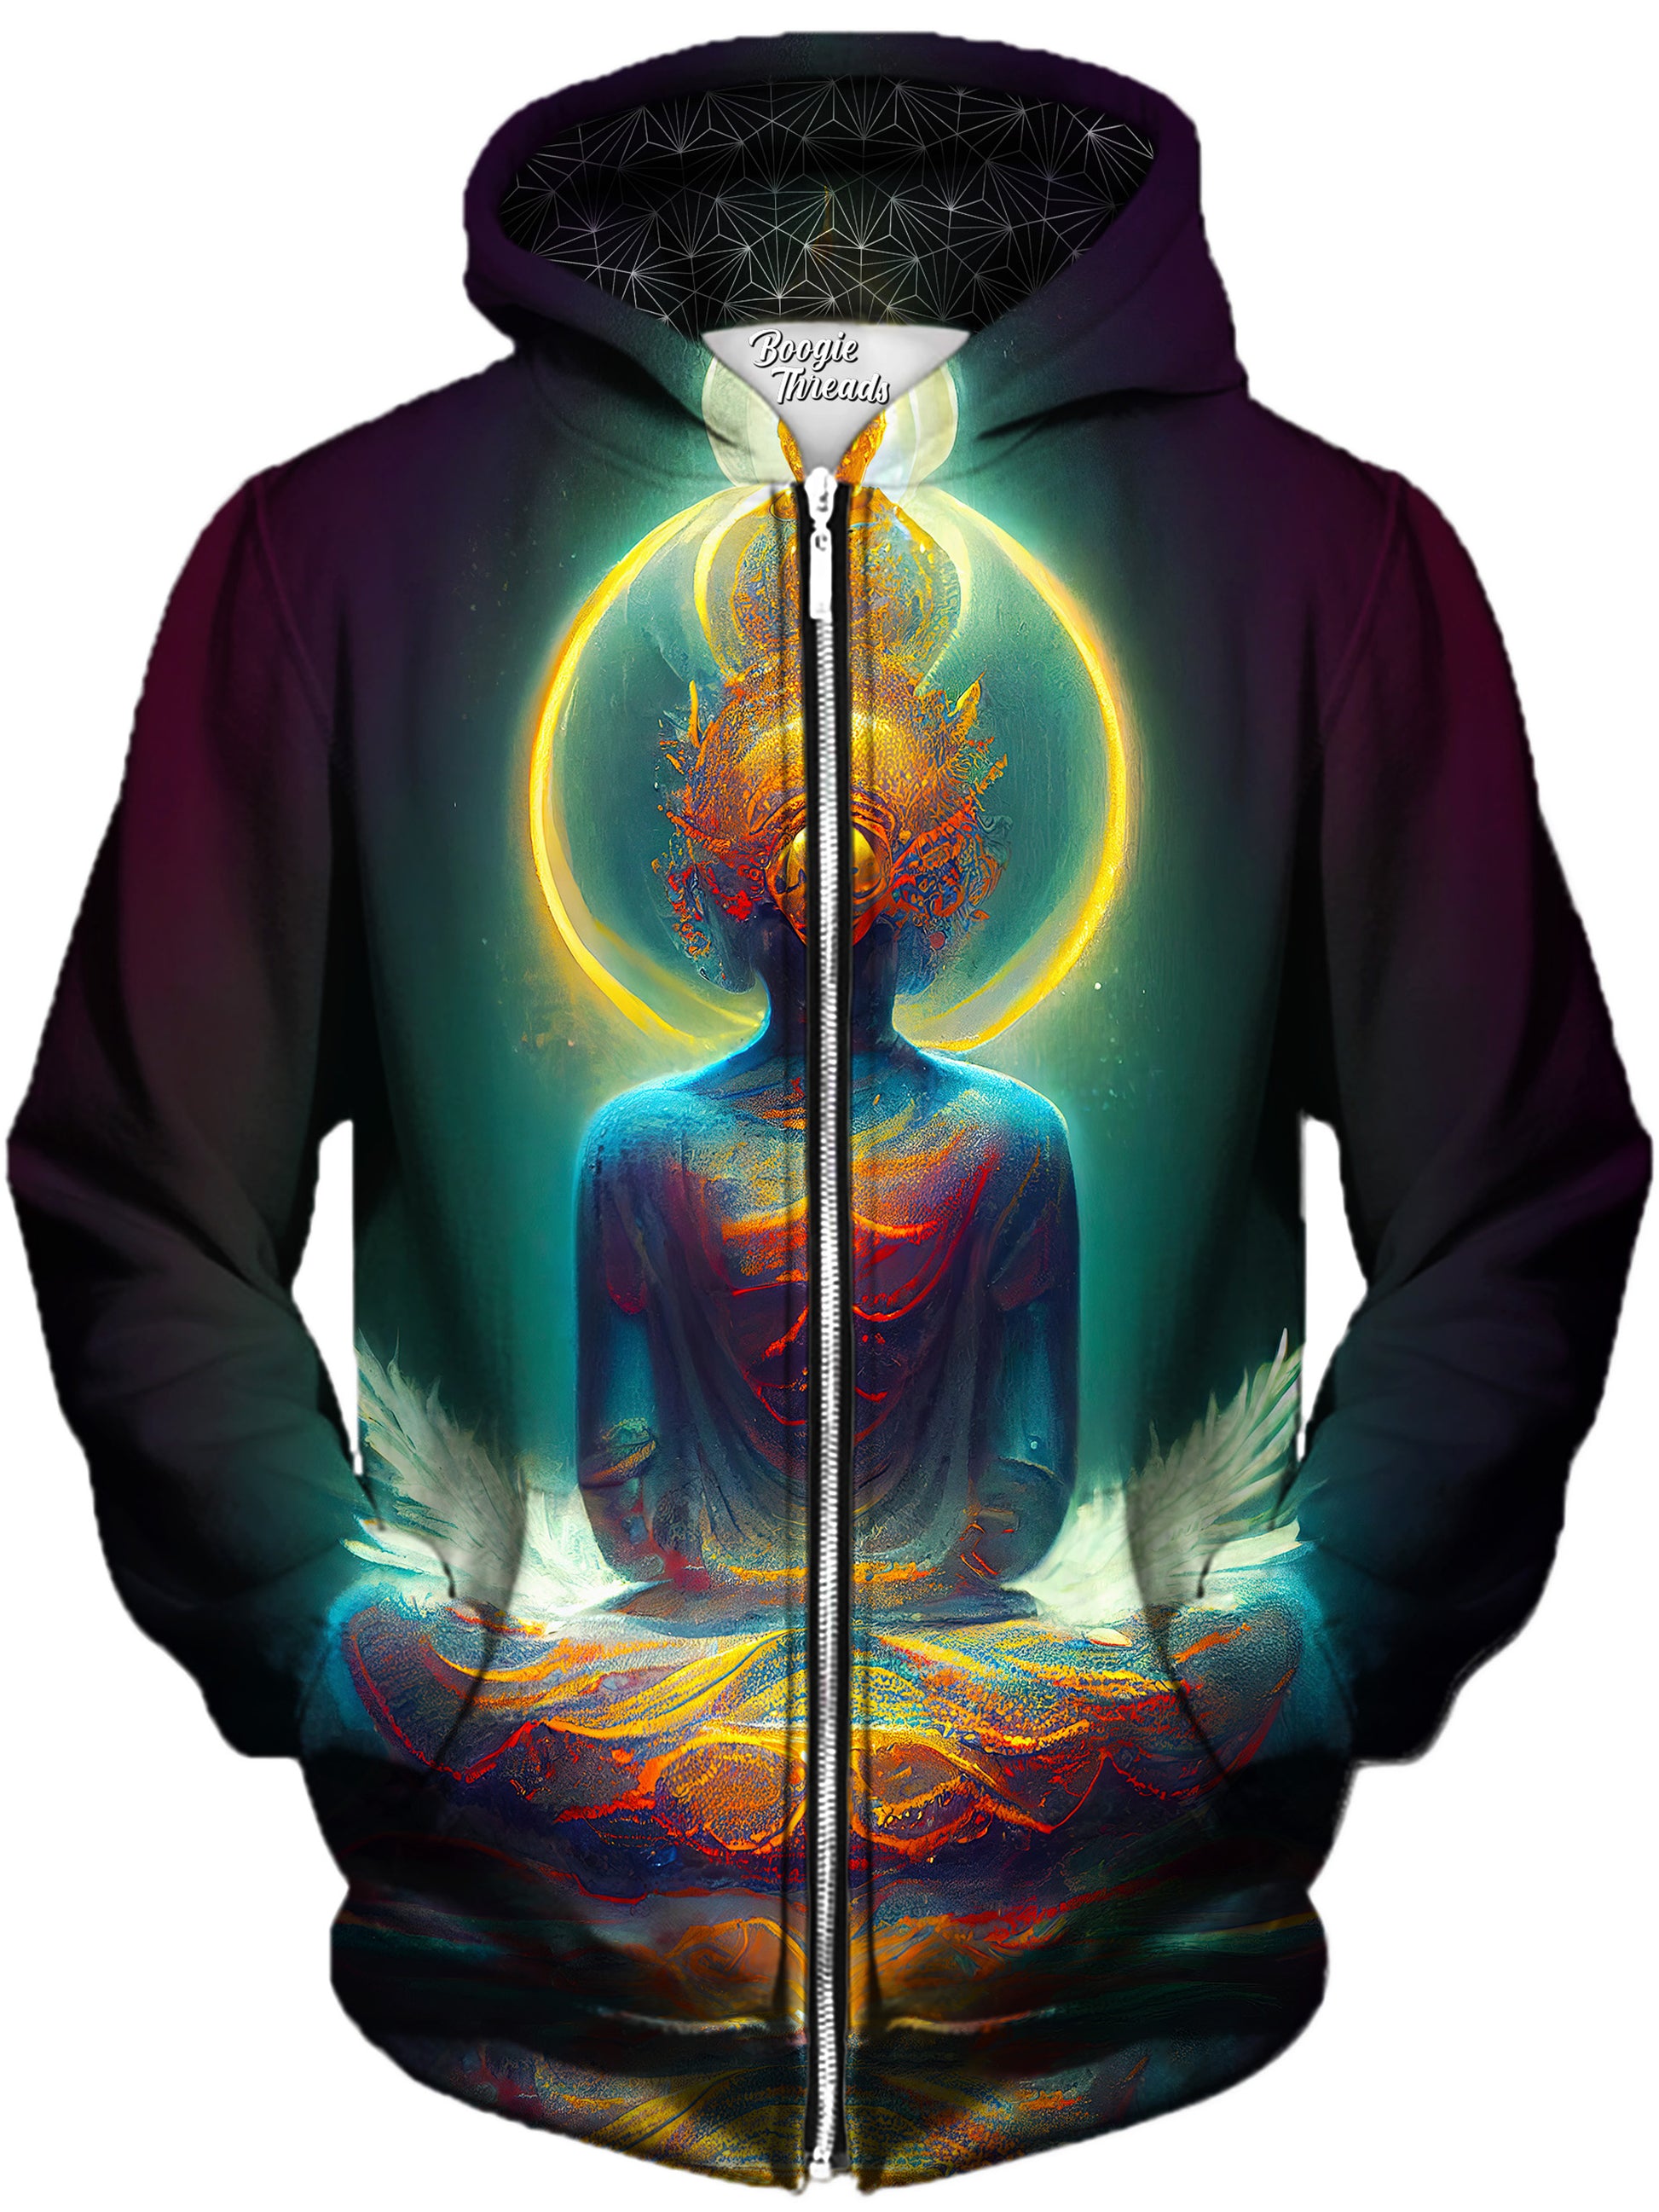 Tawdry Integrity Unisex Zip-Up Hoodie, Gratefully Dyed, | iEDM